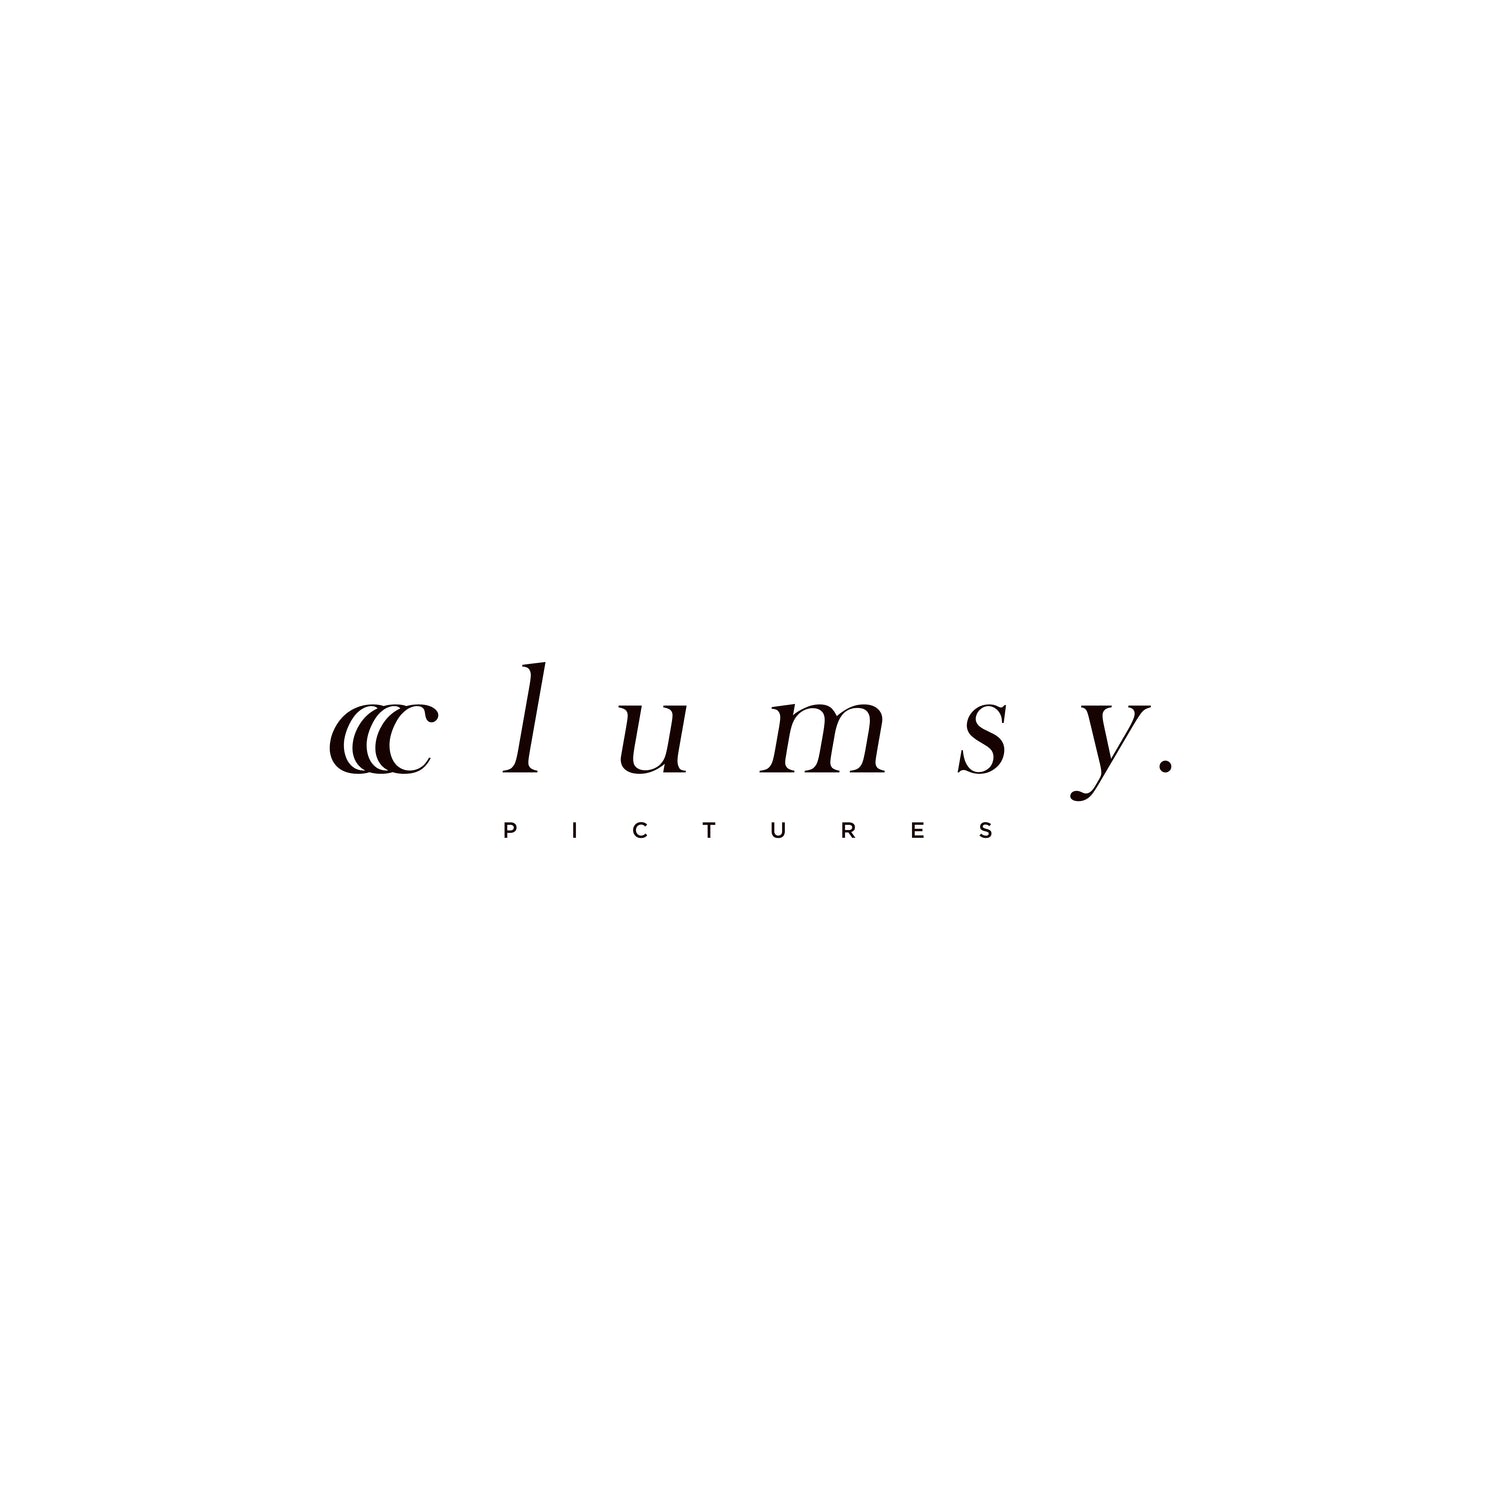 clumsy. PICTURES